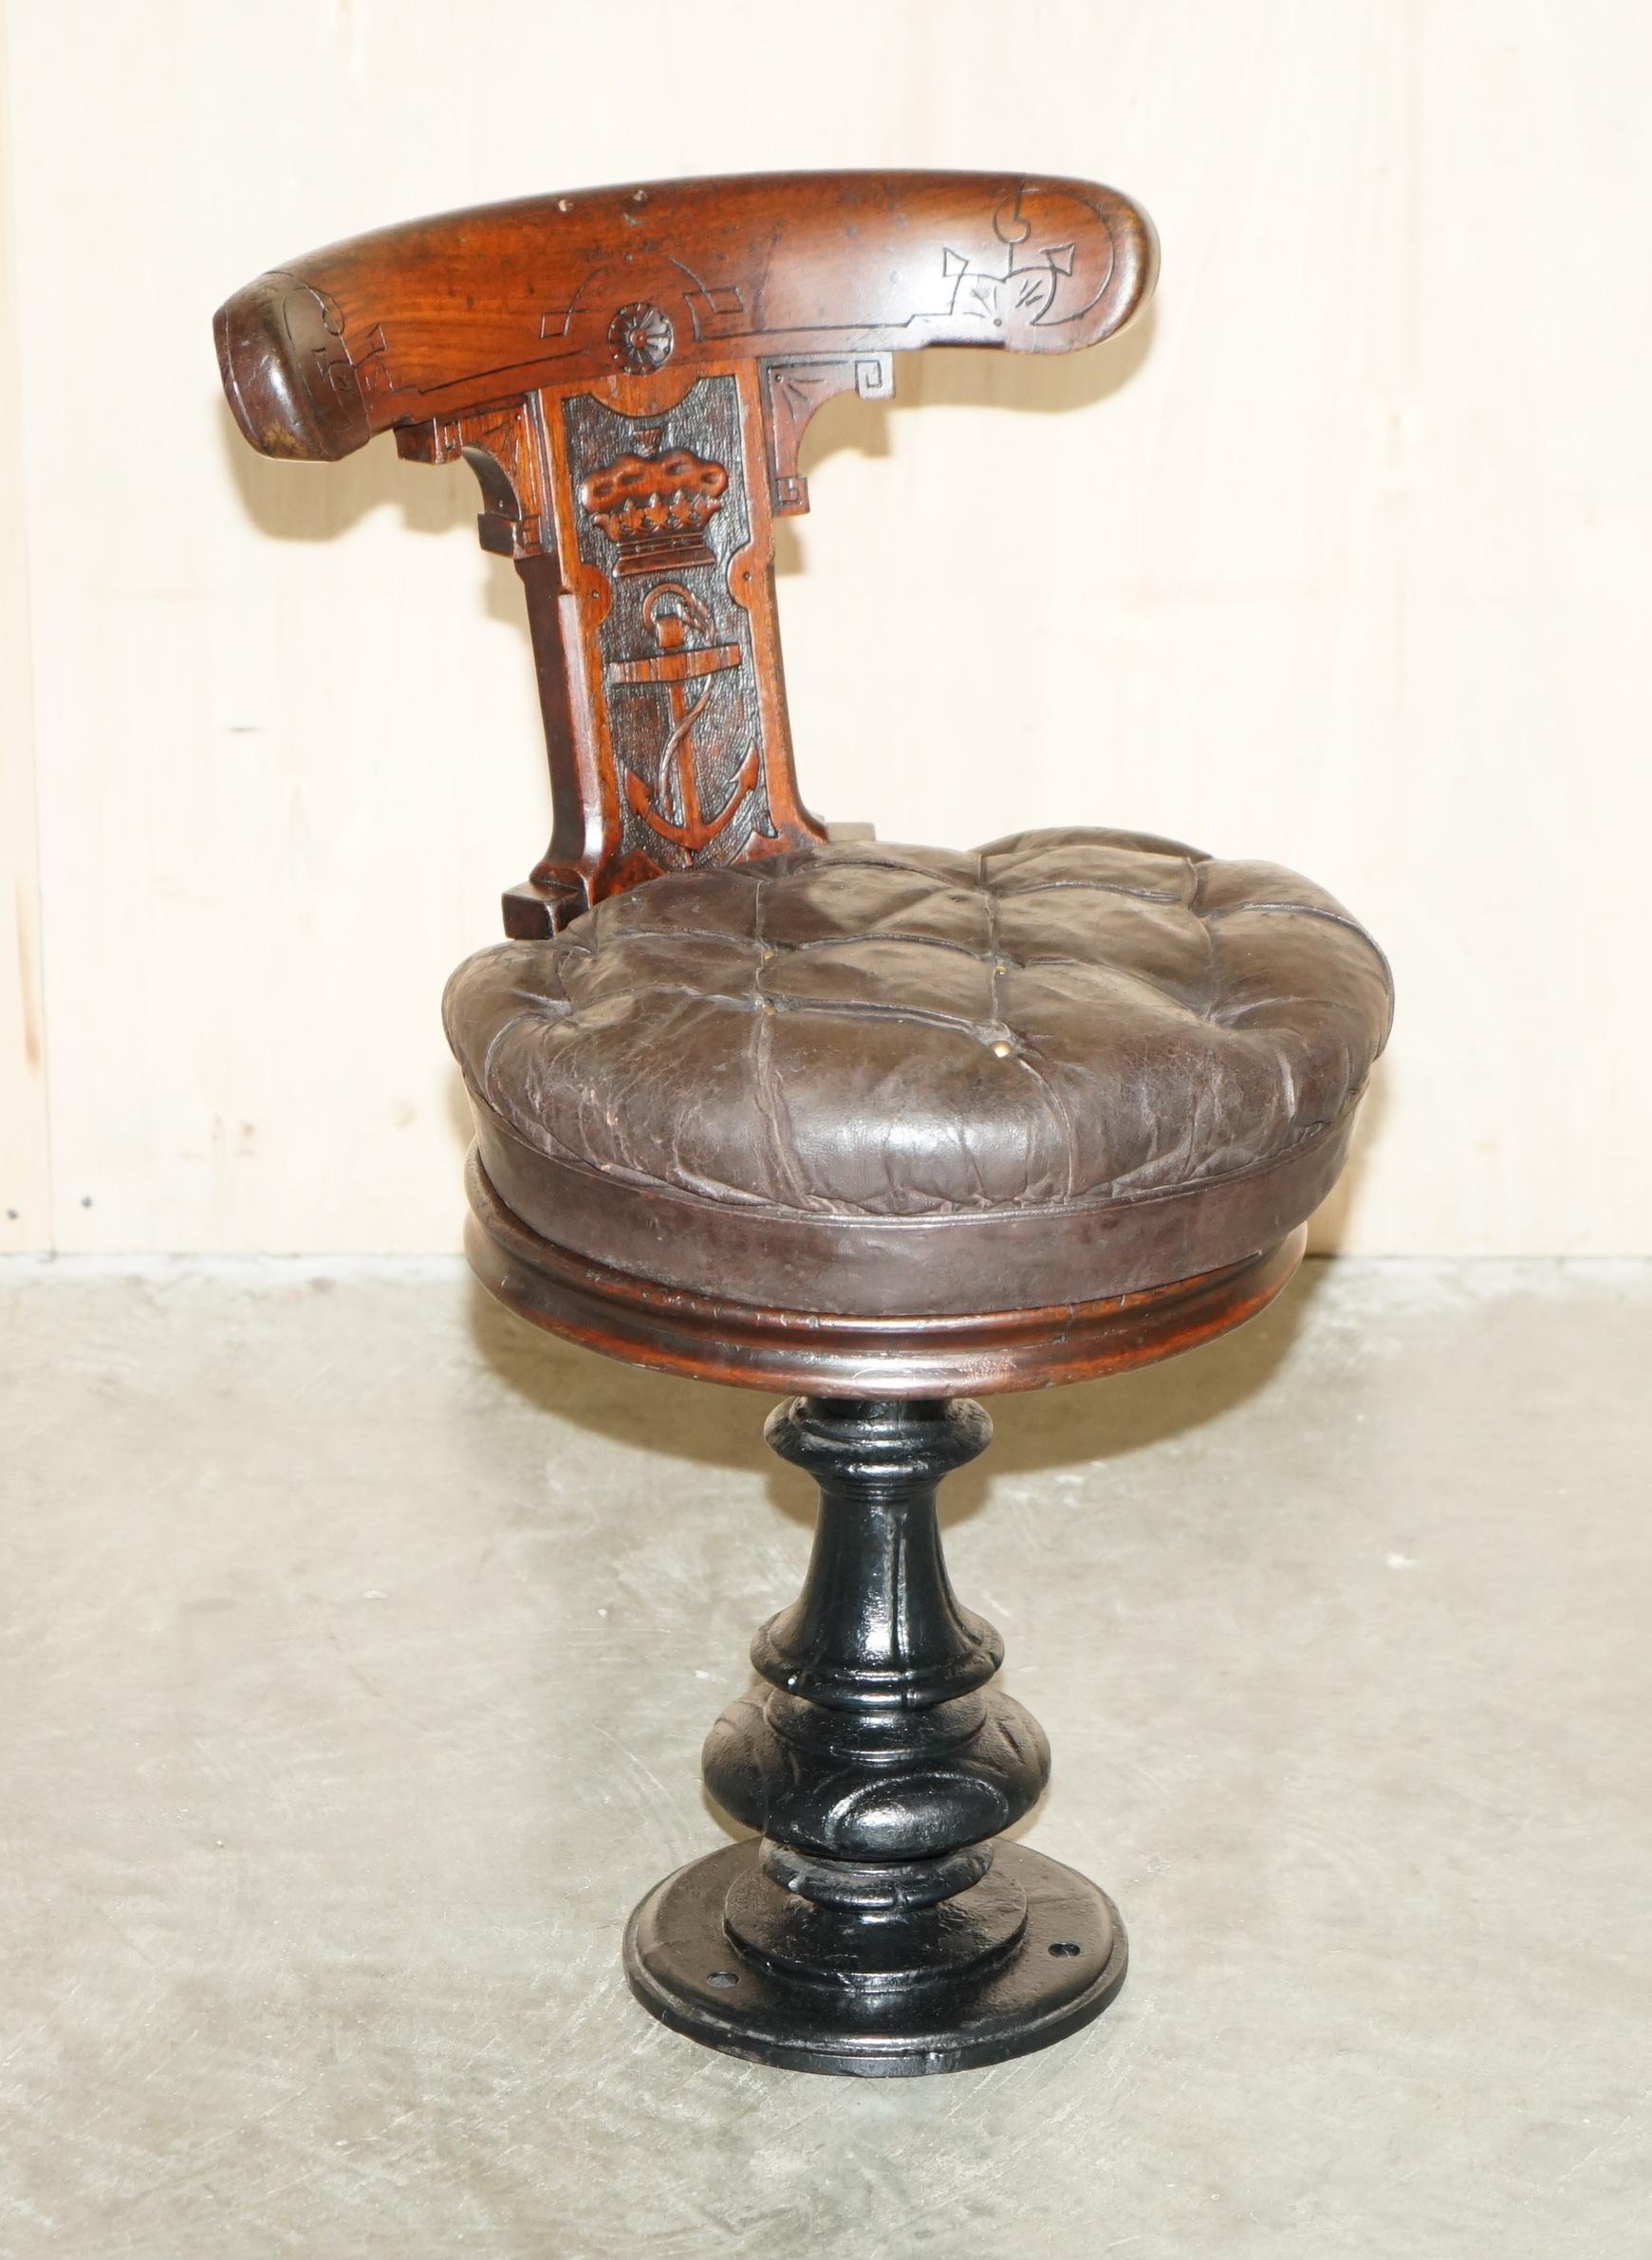 Royal House Antiques

Royal House Antiques is delighted to offer for sale this stunning original, circa 1800 hand carved Mahogany ships captains chair depicting a Royal Crown and Anchor to the backrest and with the original leather Chesterfield